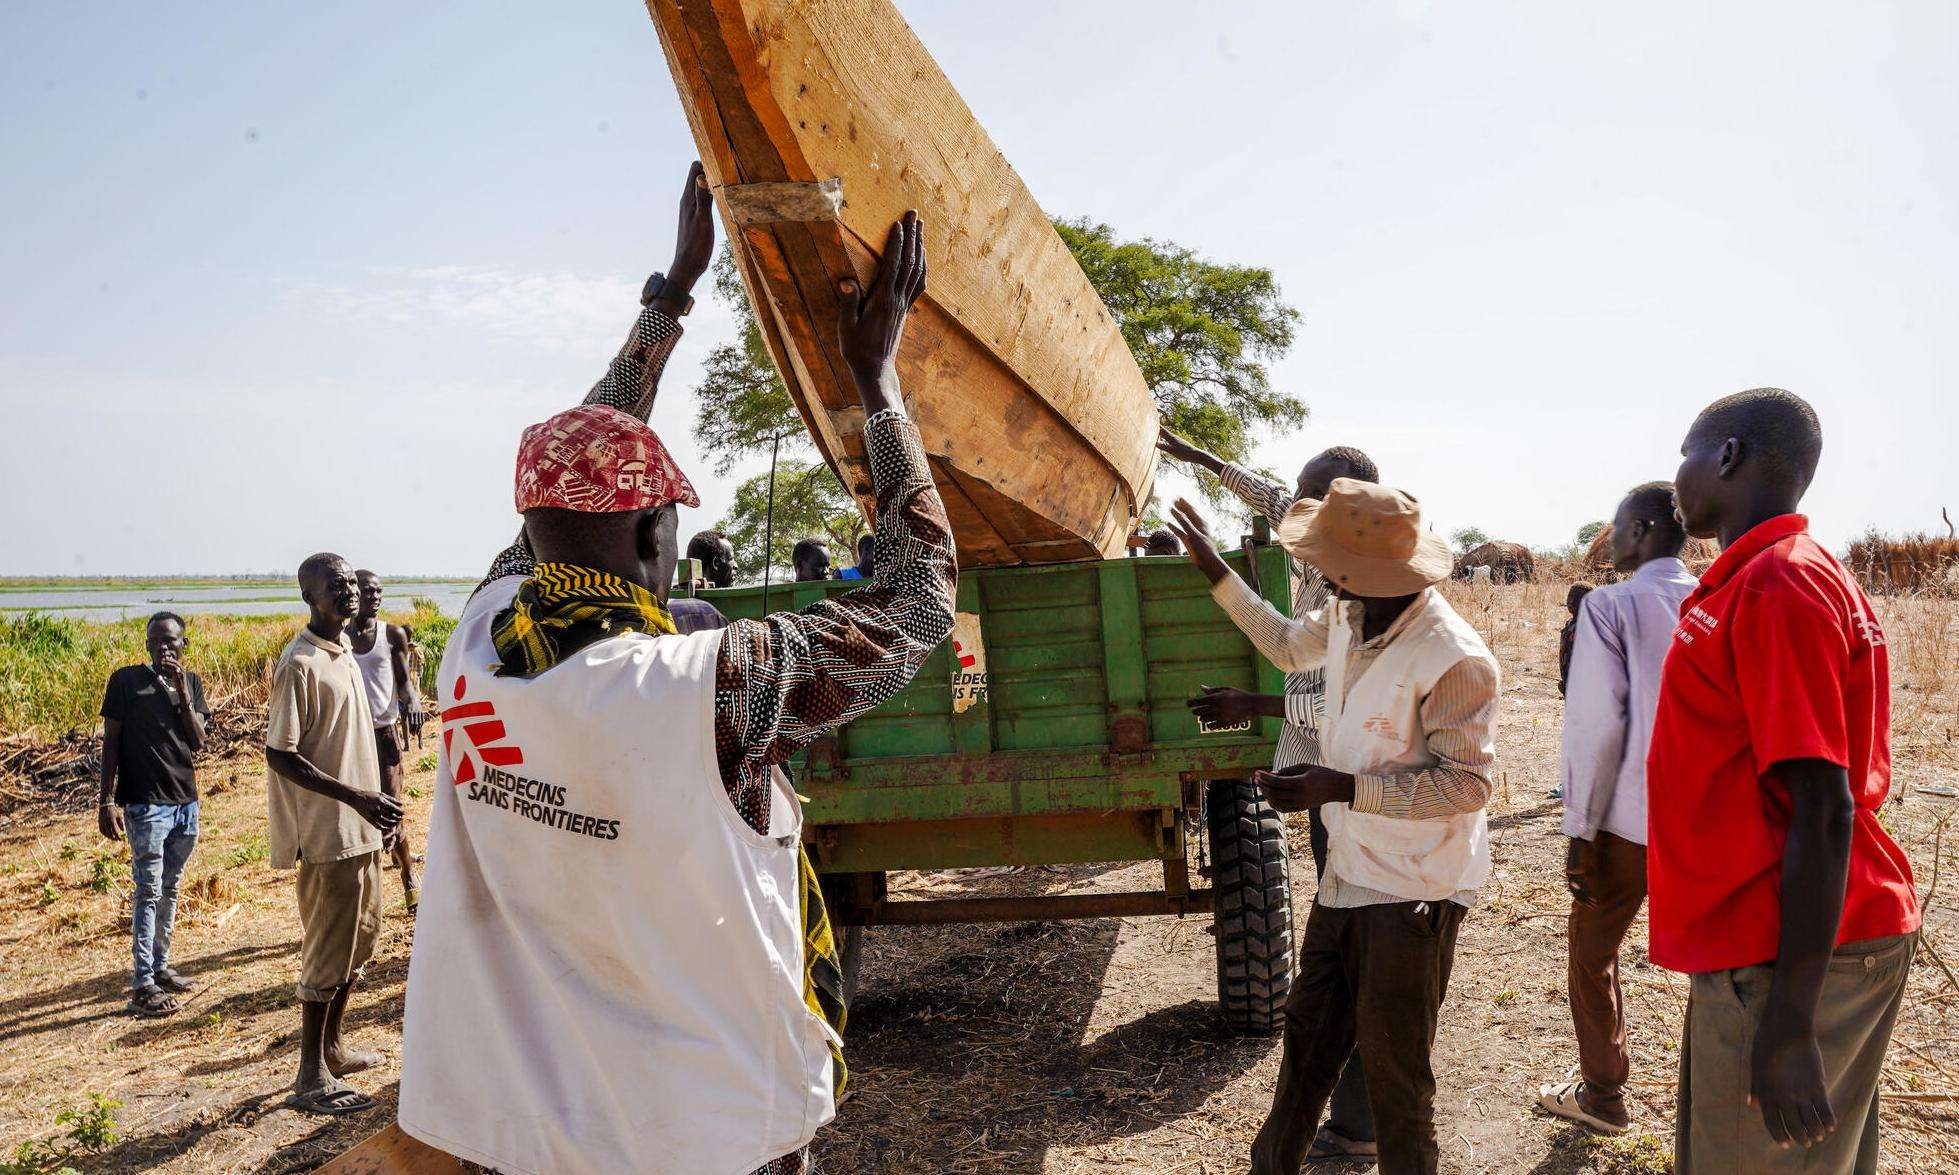 People wearing white vests with MSF logo remove canoe from tractor in Dentiuk, South Sudan